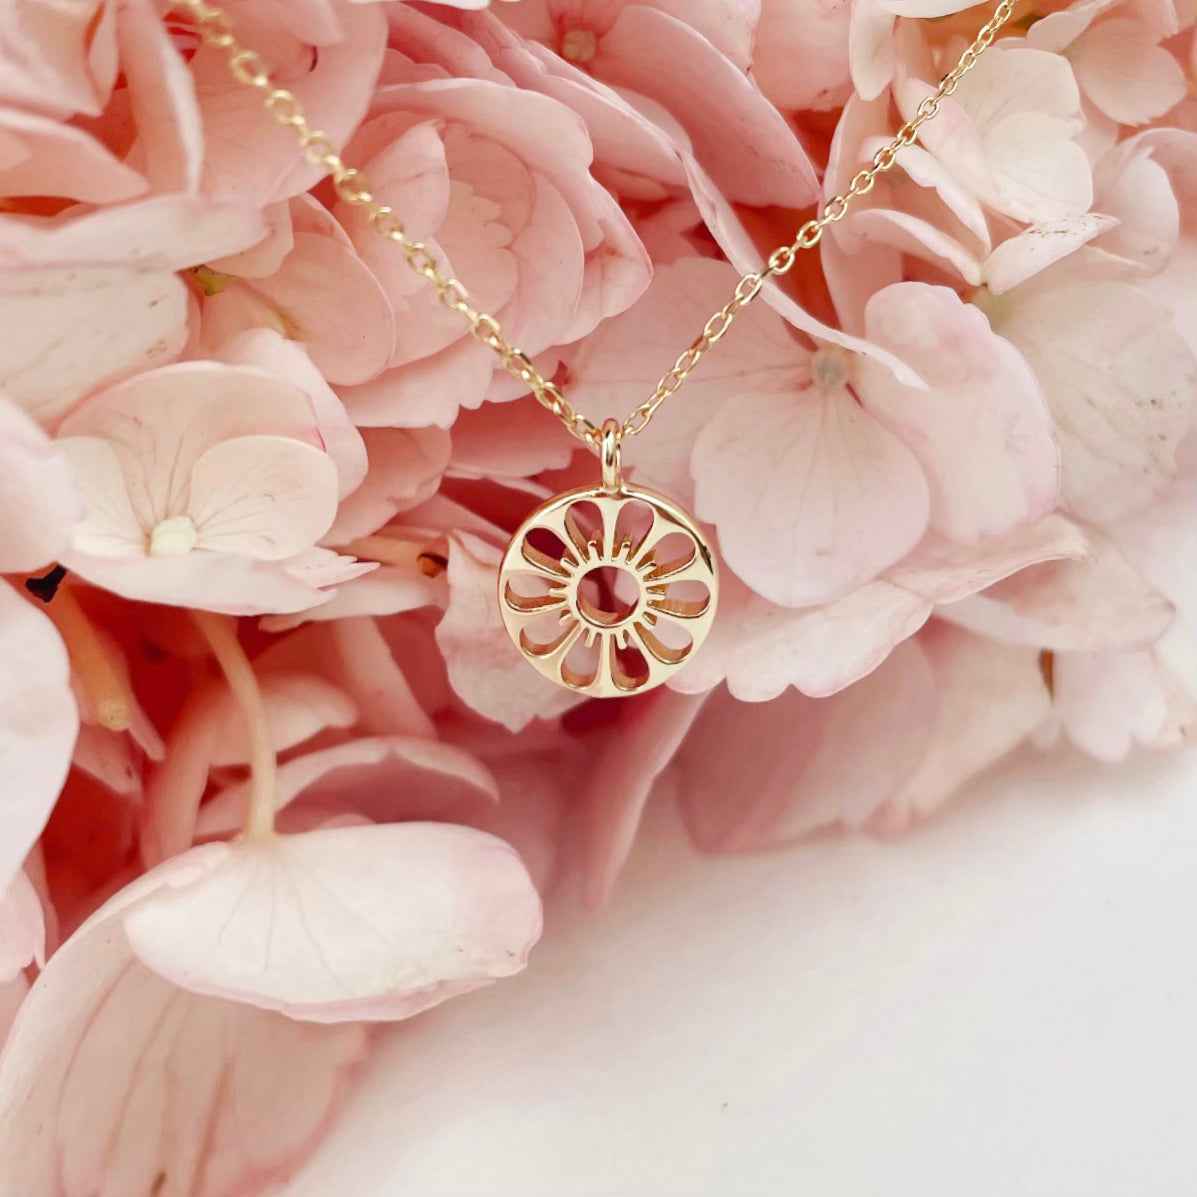 A dainty gold chain necklace with a gold circle pendant in the center with a cut out of a daisy flower, photographed in front of pink hydrangeas.